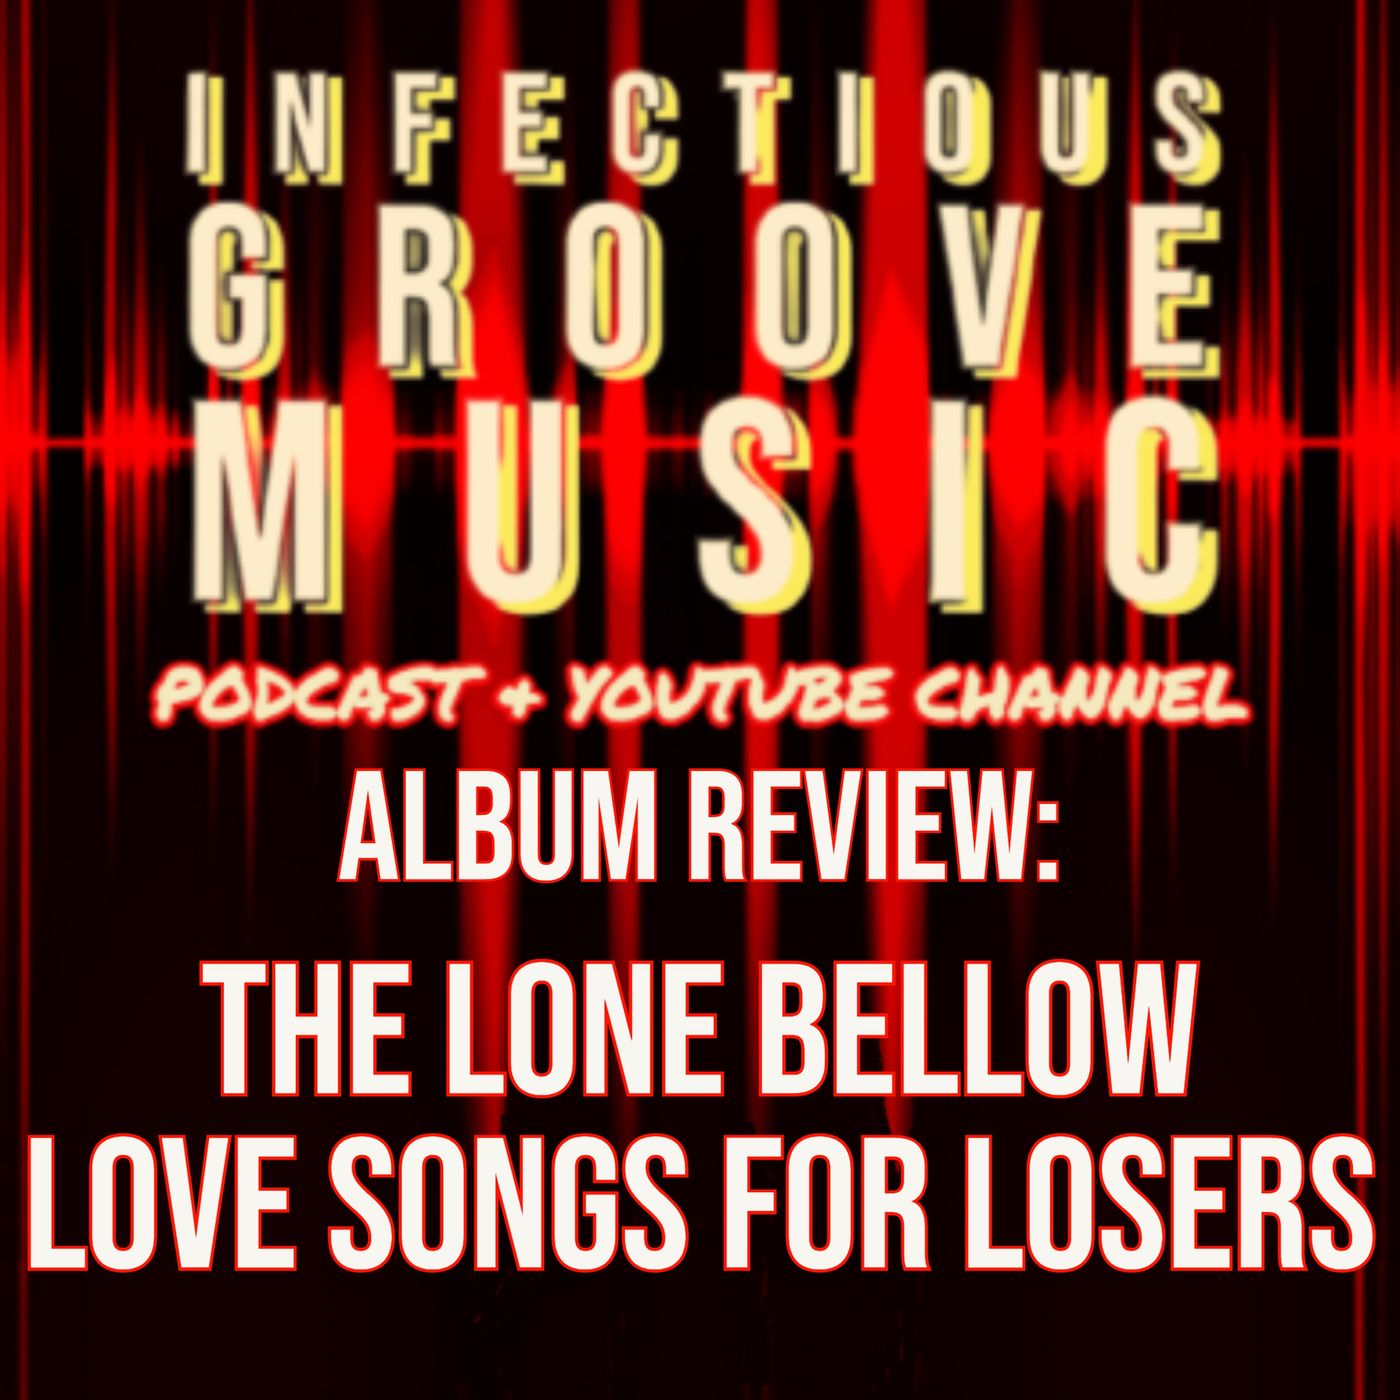 IGP Album Review: The Lone Bellow - Love Songs For Losers